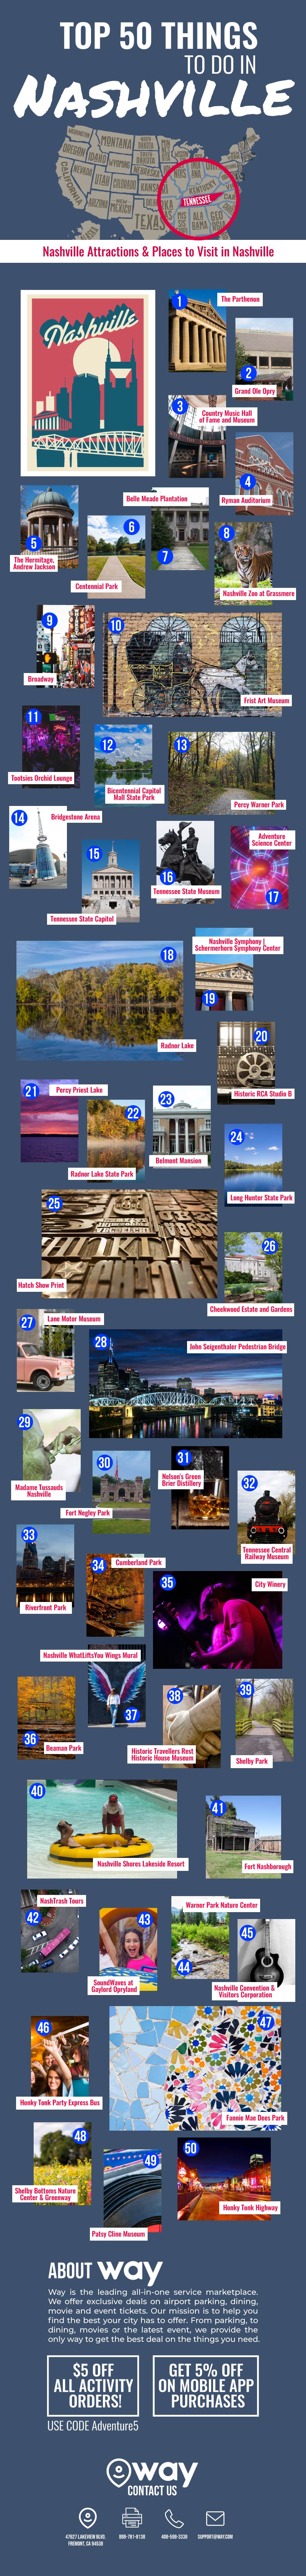 Top-50-Things-to-Do-in-Nashville-infographic-plaza